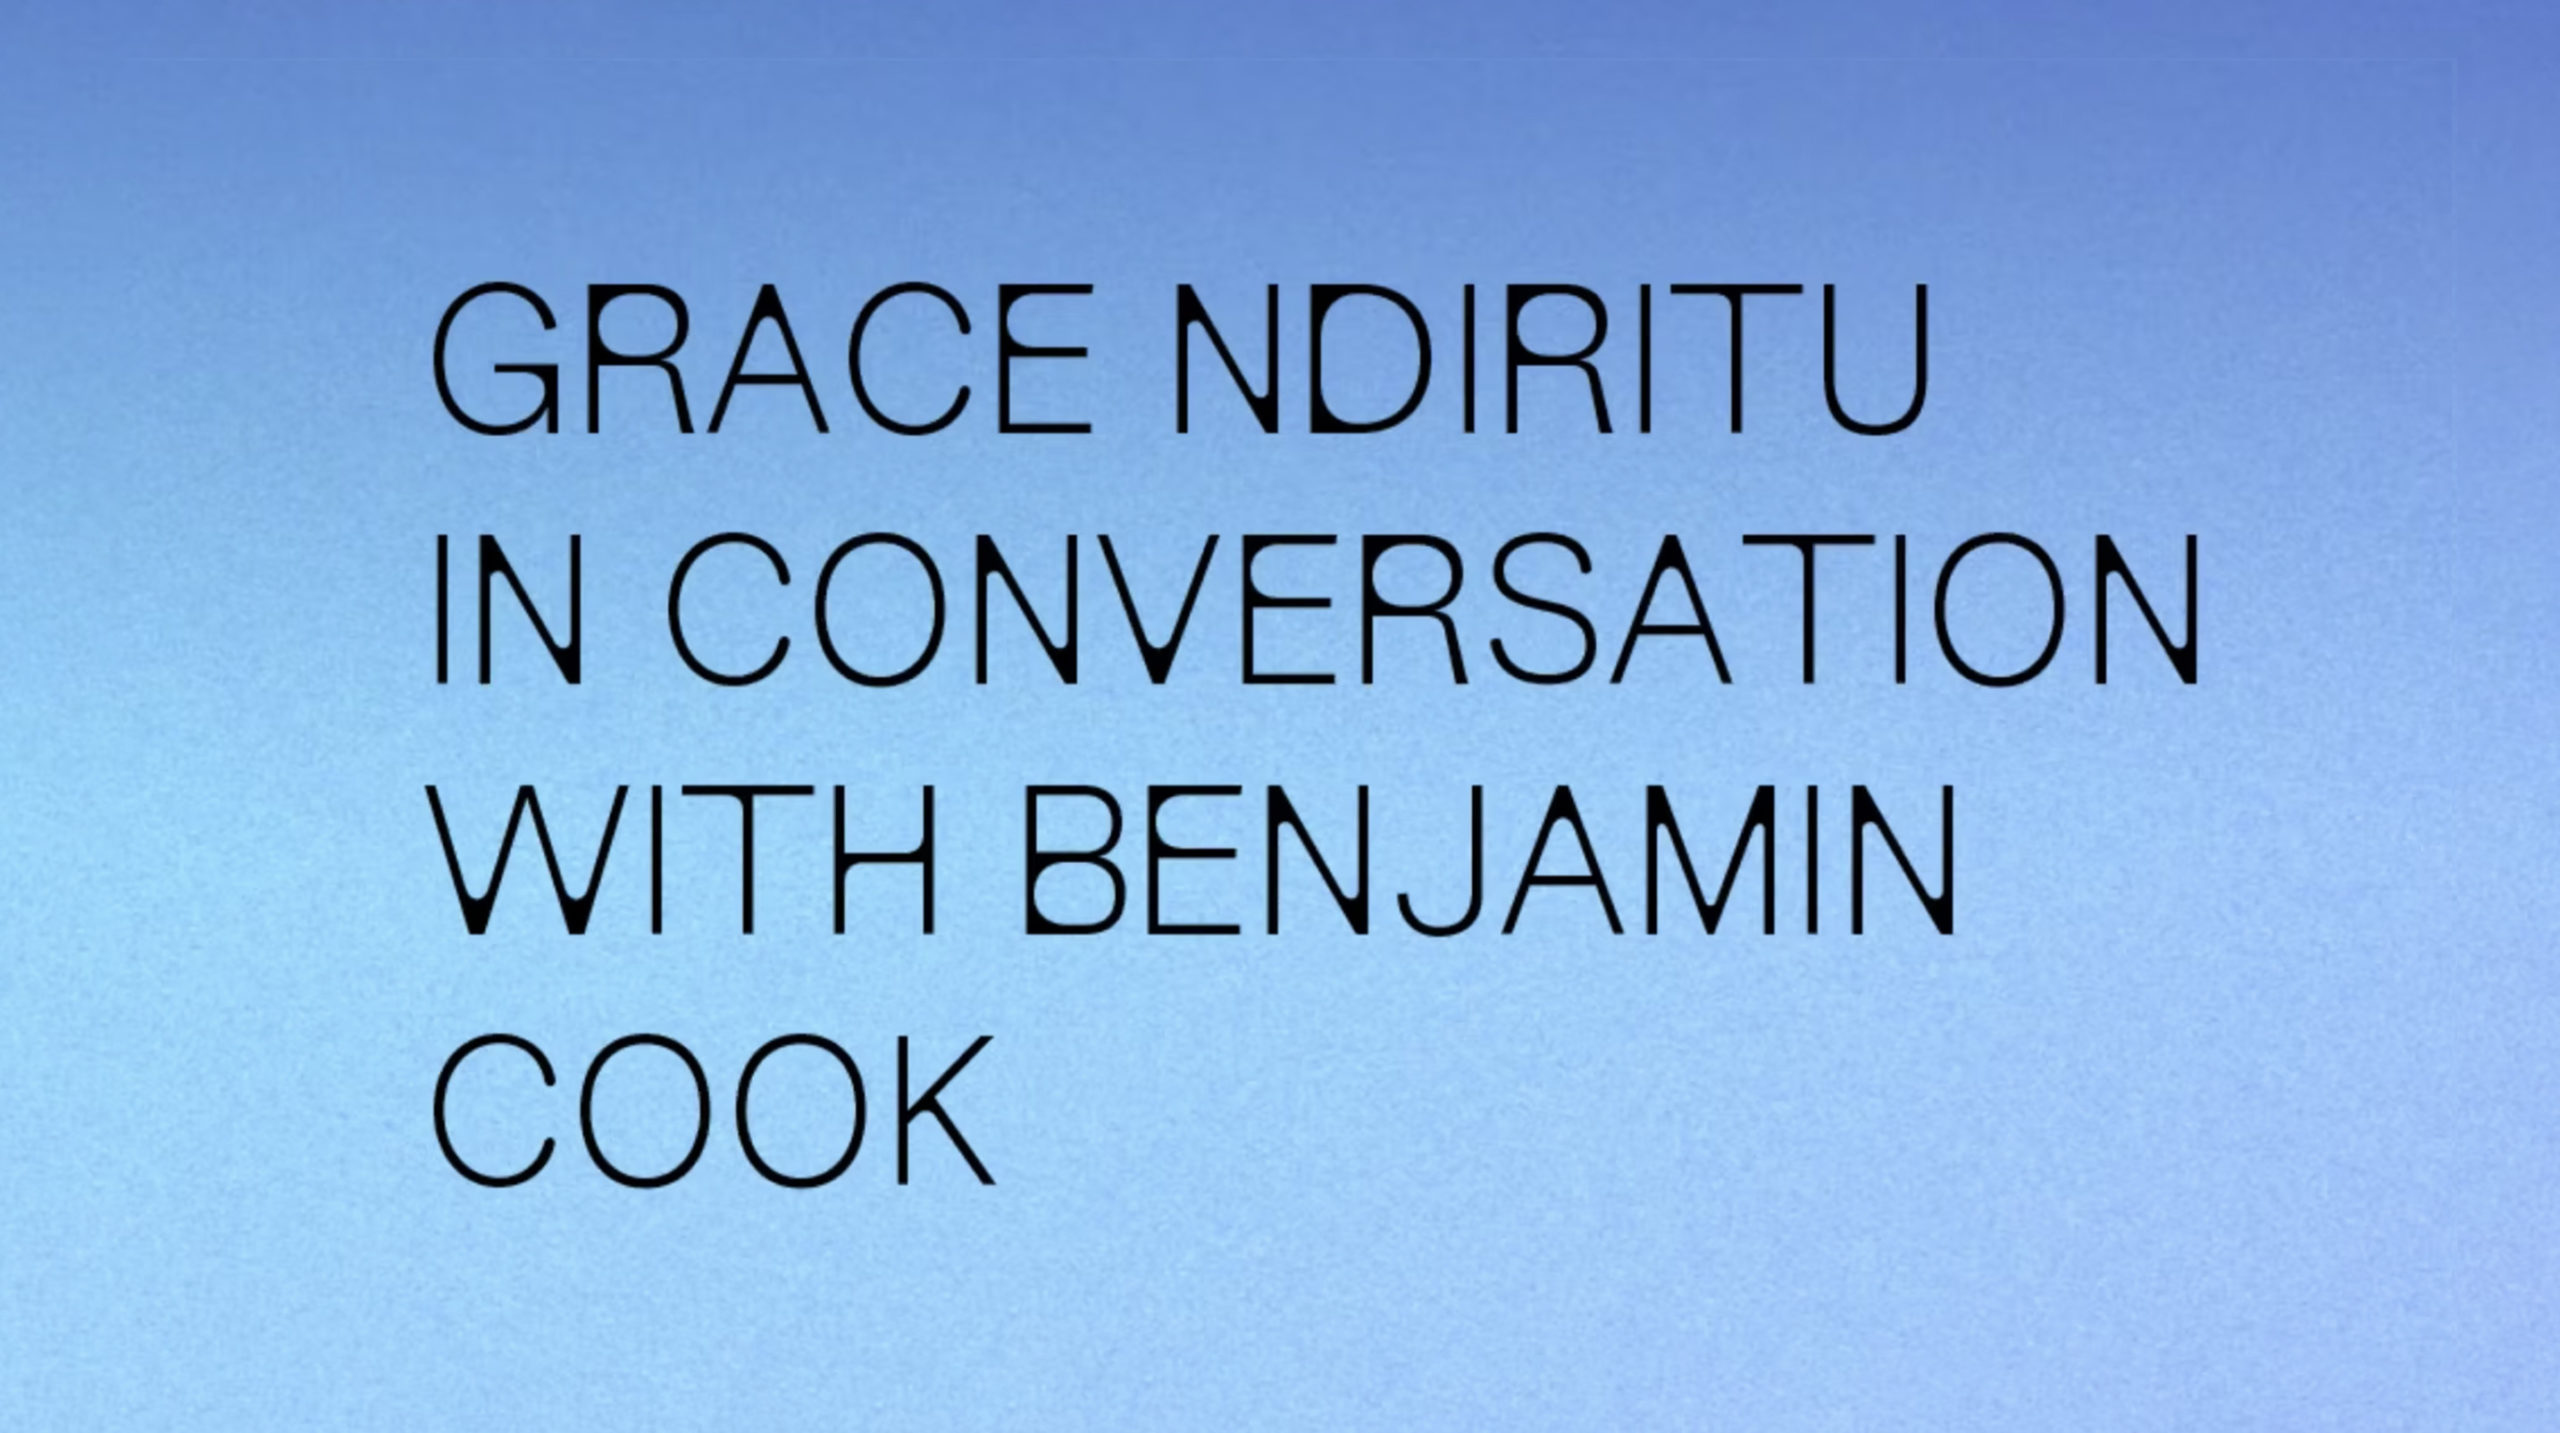 on a blue gradient background is a title that reads "Grace Ndiritu in conversation with Benjamin Cook"